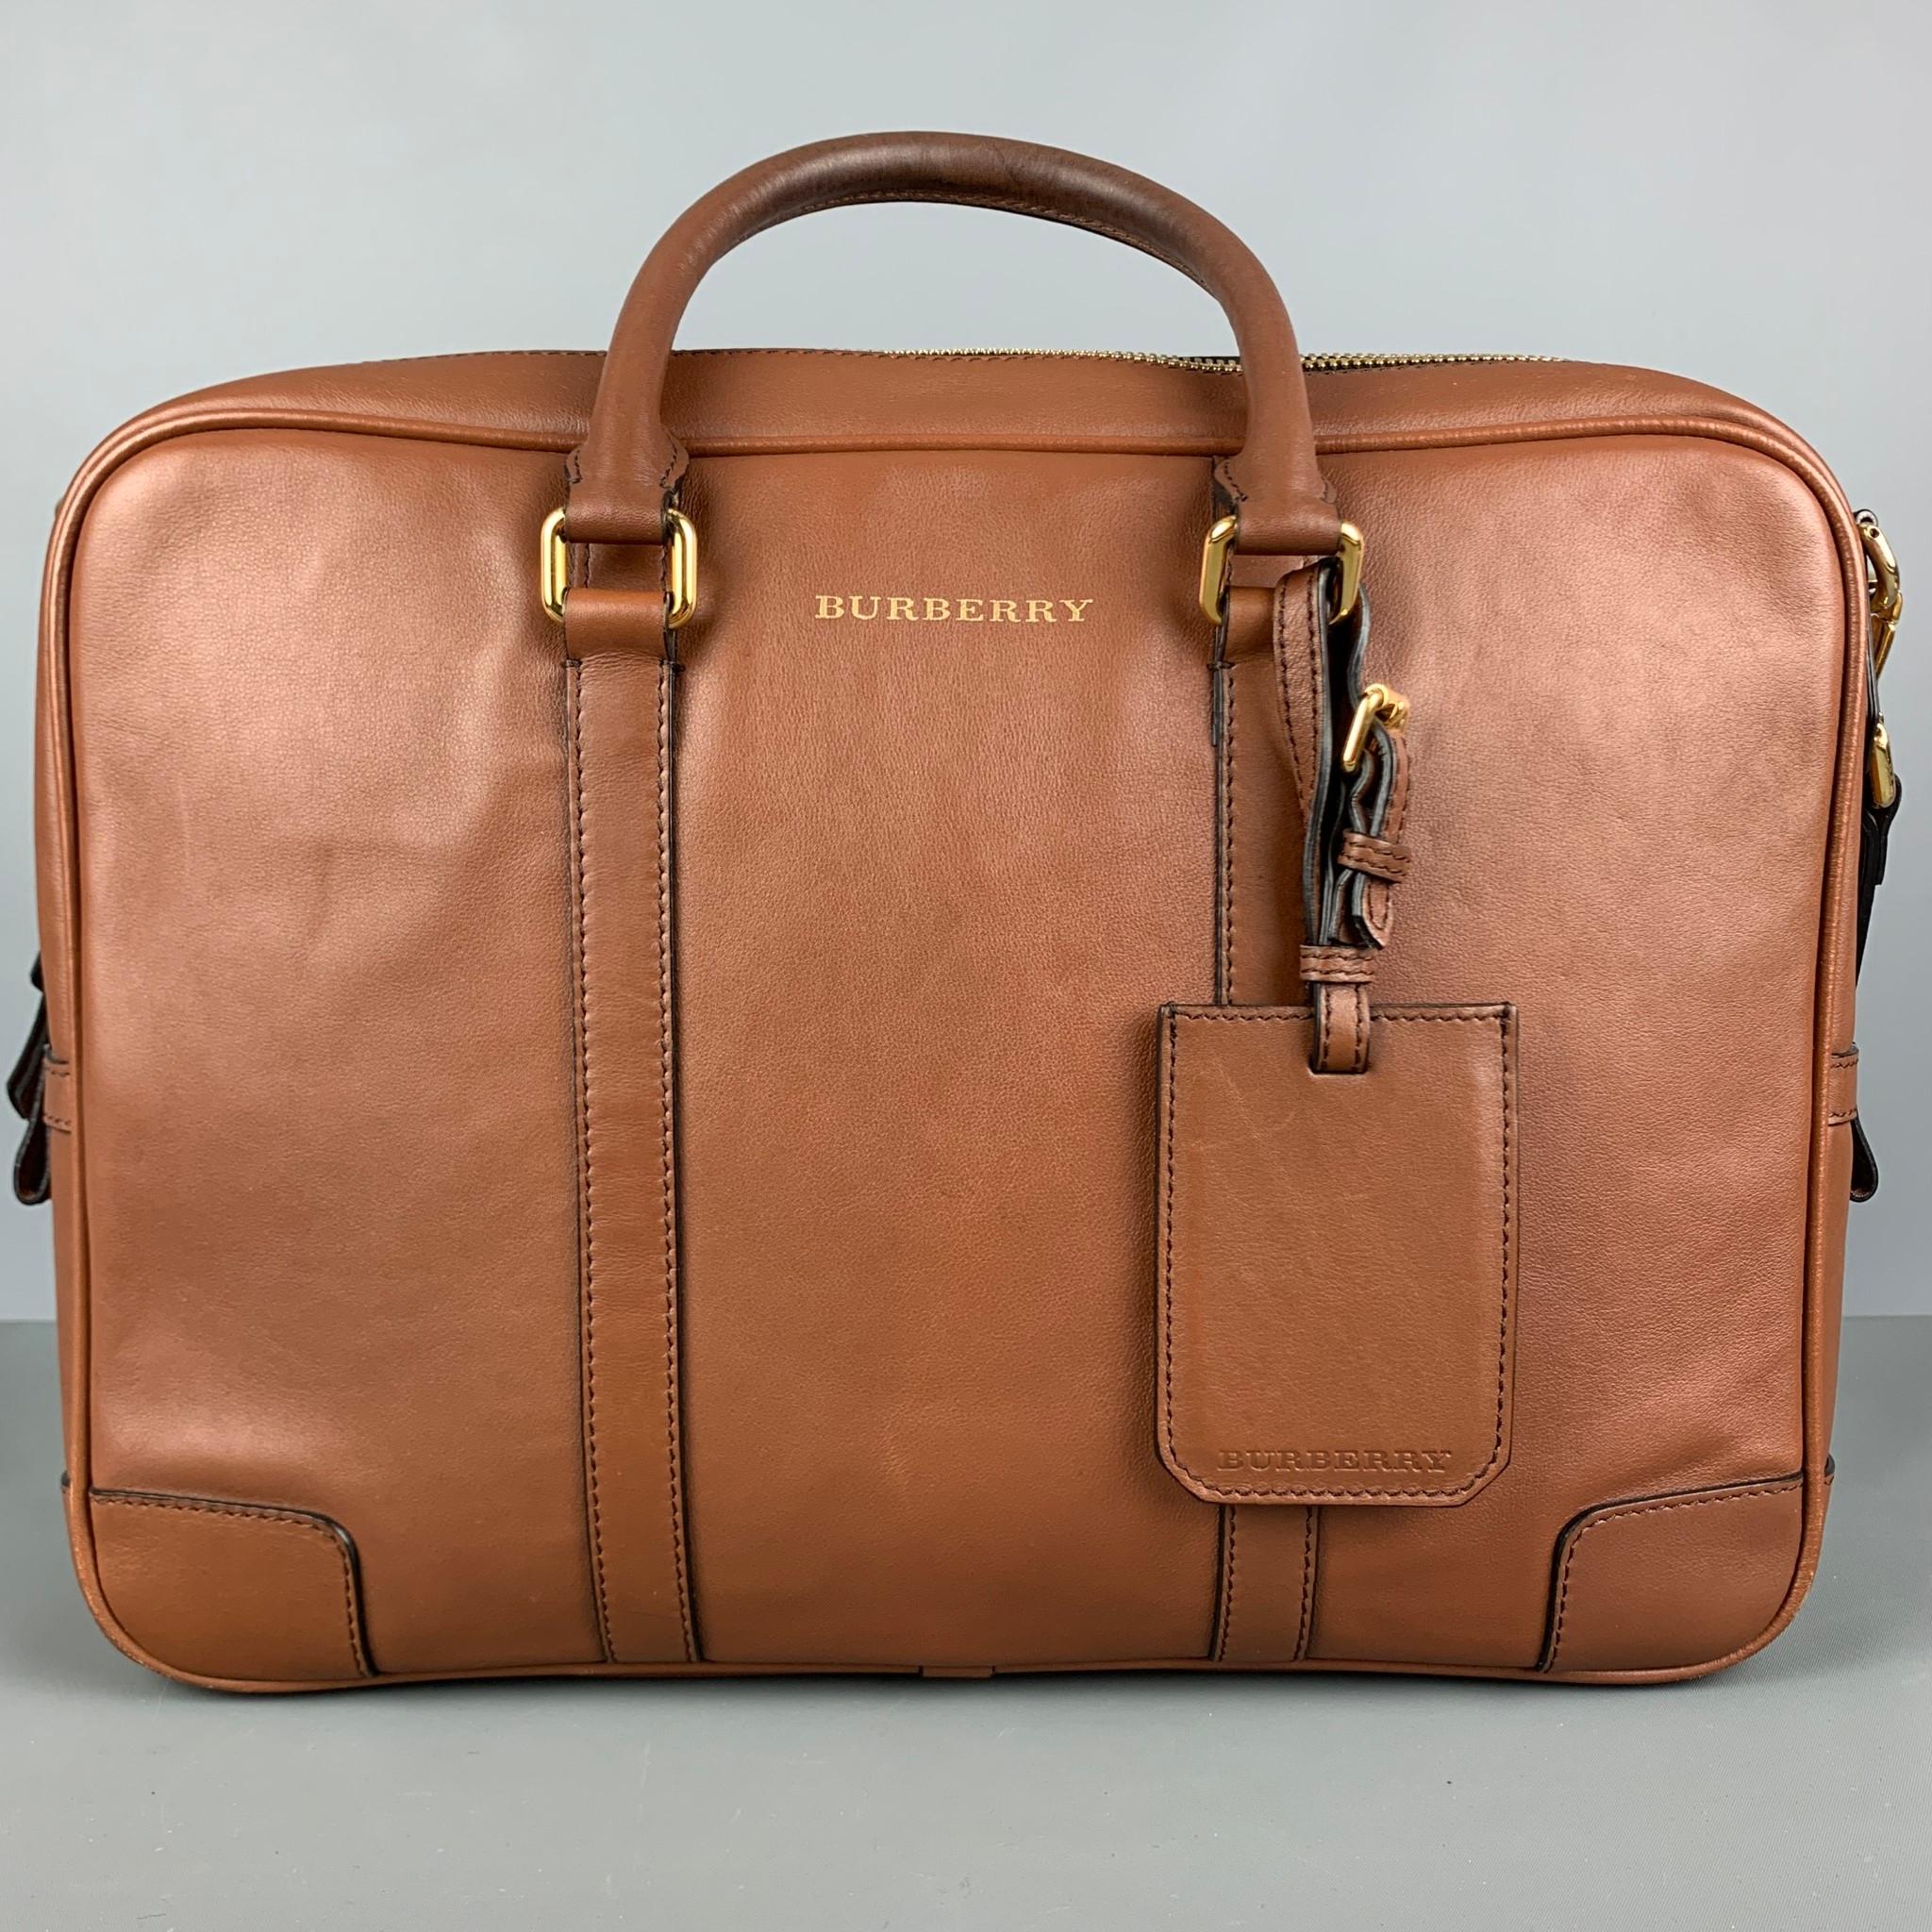 BURBERRY briefcase come in tan leather material featuring a detachable shoulder strap, gold tone hardware, inner pocket and inner slots, luggage name tag, Burberry signature plaid lining, and a zipper closure. This item comes with dust bag. Made in